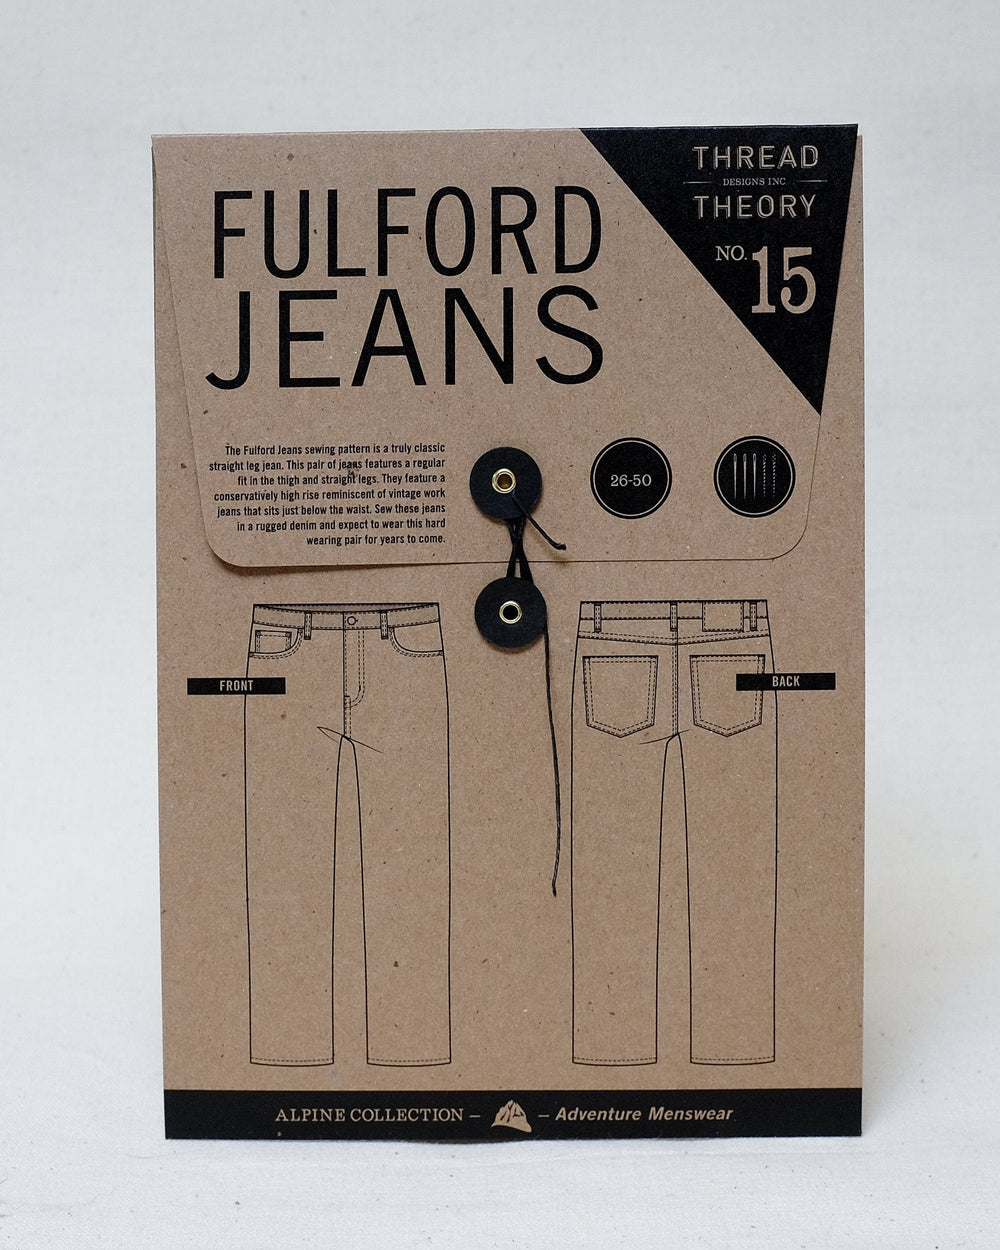 Fulford Jeans - Thread Theory